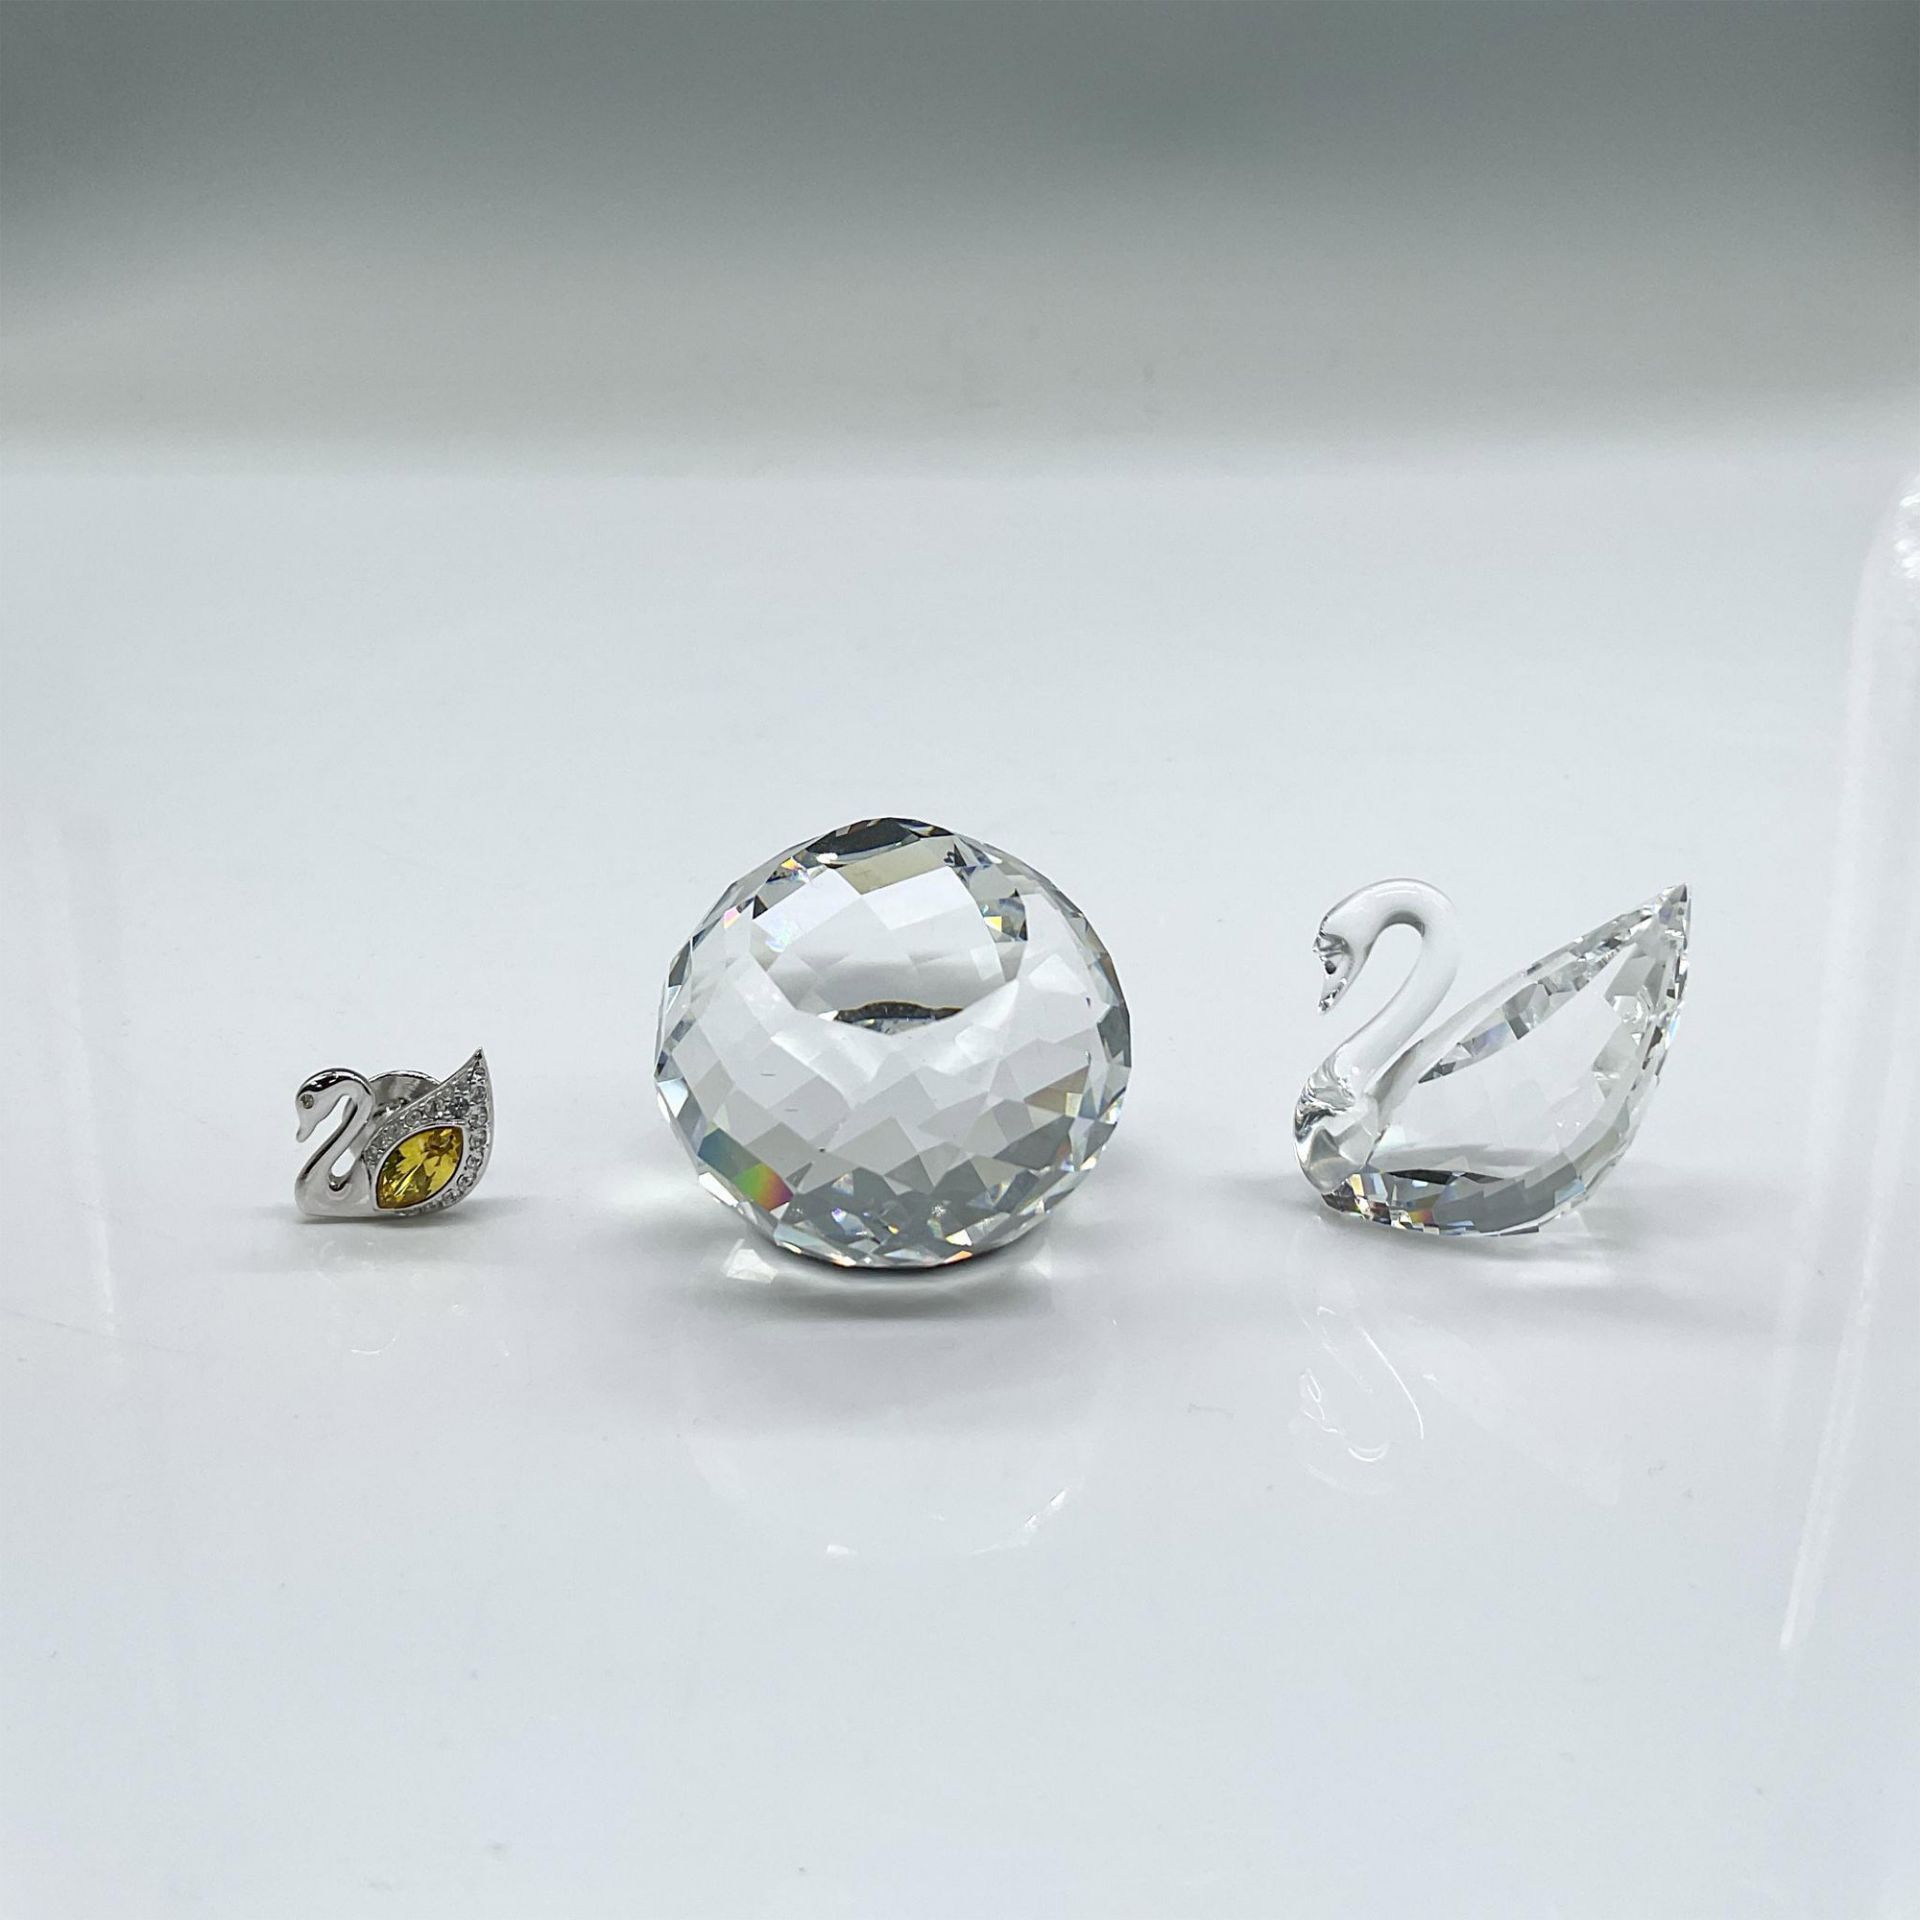 3pc Swarovski Crystal Swan, Paperweight and Brooch Pin